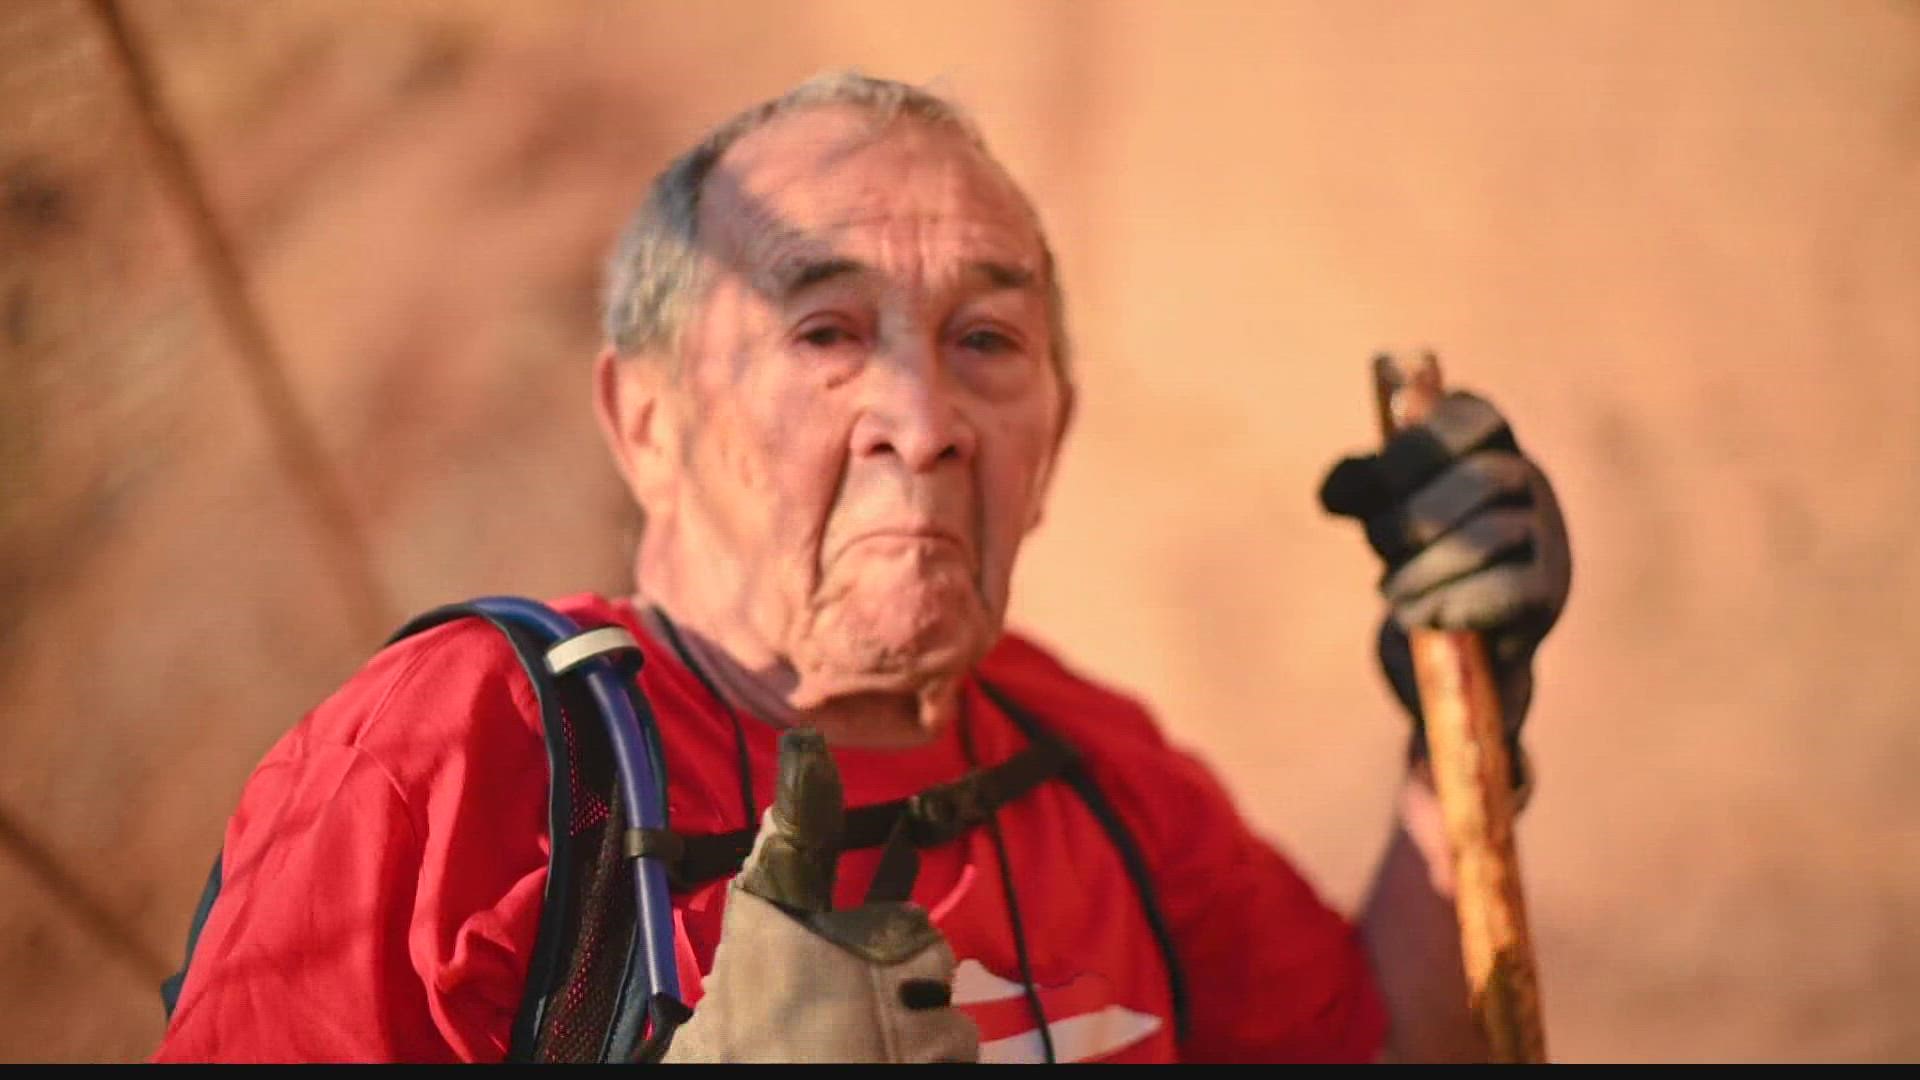 All hail the king! A Valley man has become a hiking fixture on Camelback Mountain. Meet the 87-year-old dubbed "king of the mountain."